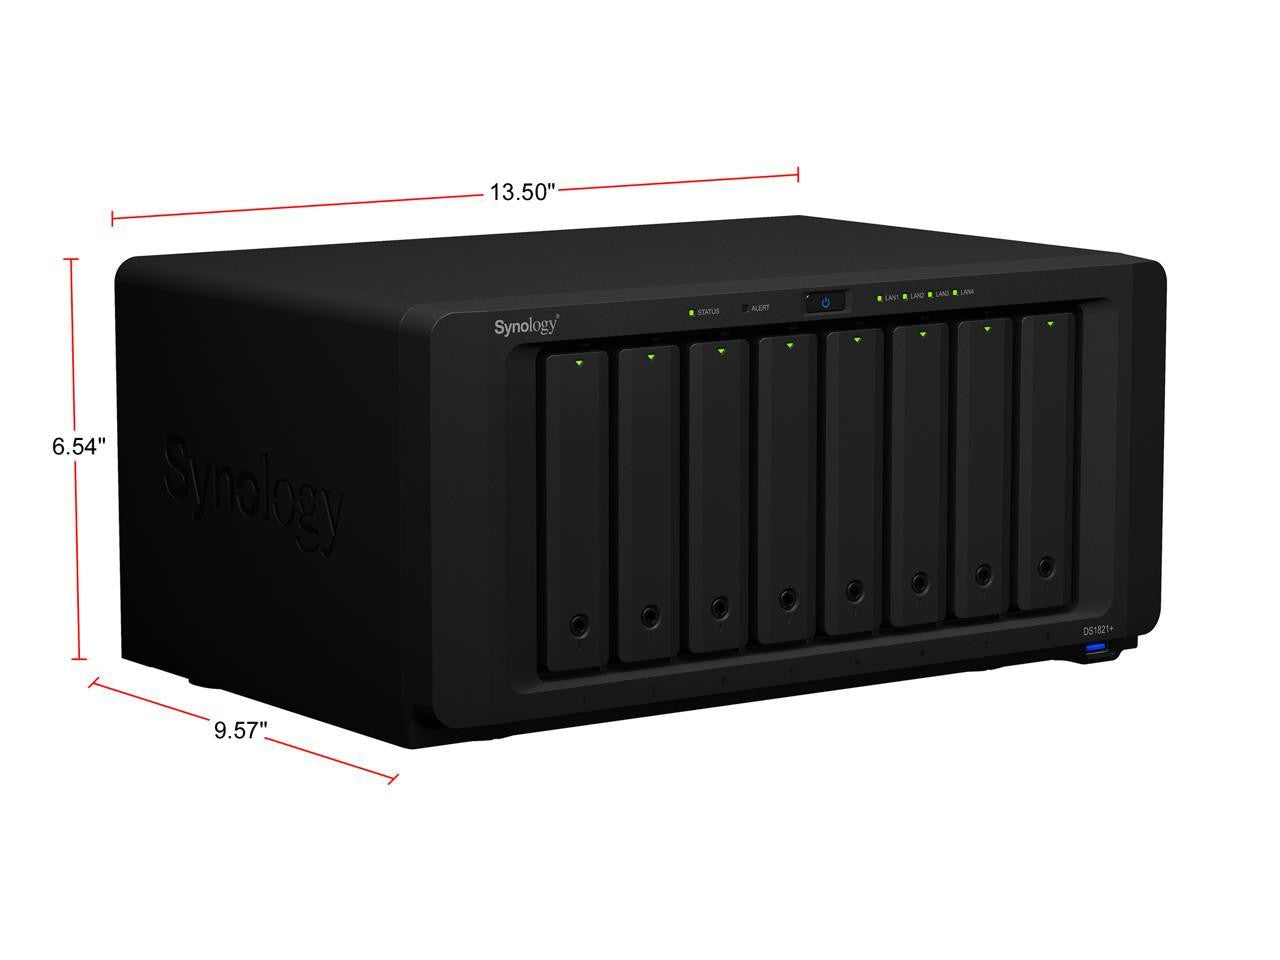 Synology DS1821+ 8-BAY DiskStation with 32GB RAM, 1.6TB (2x800GB) Cache, E10G18-T2 RJ45 10Gb Adapter and 96TB (8 x 12TB) of Synology Enterprise HAT5300 Drives Fully Assembled and Tested